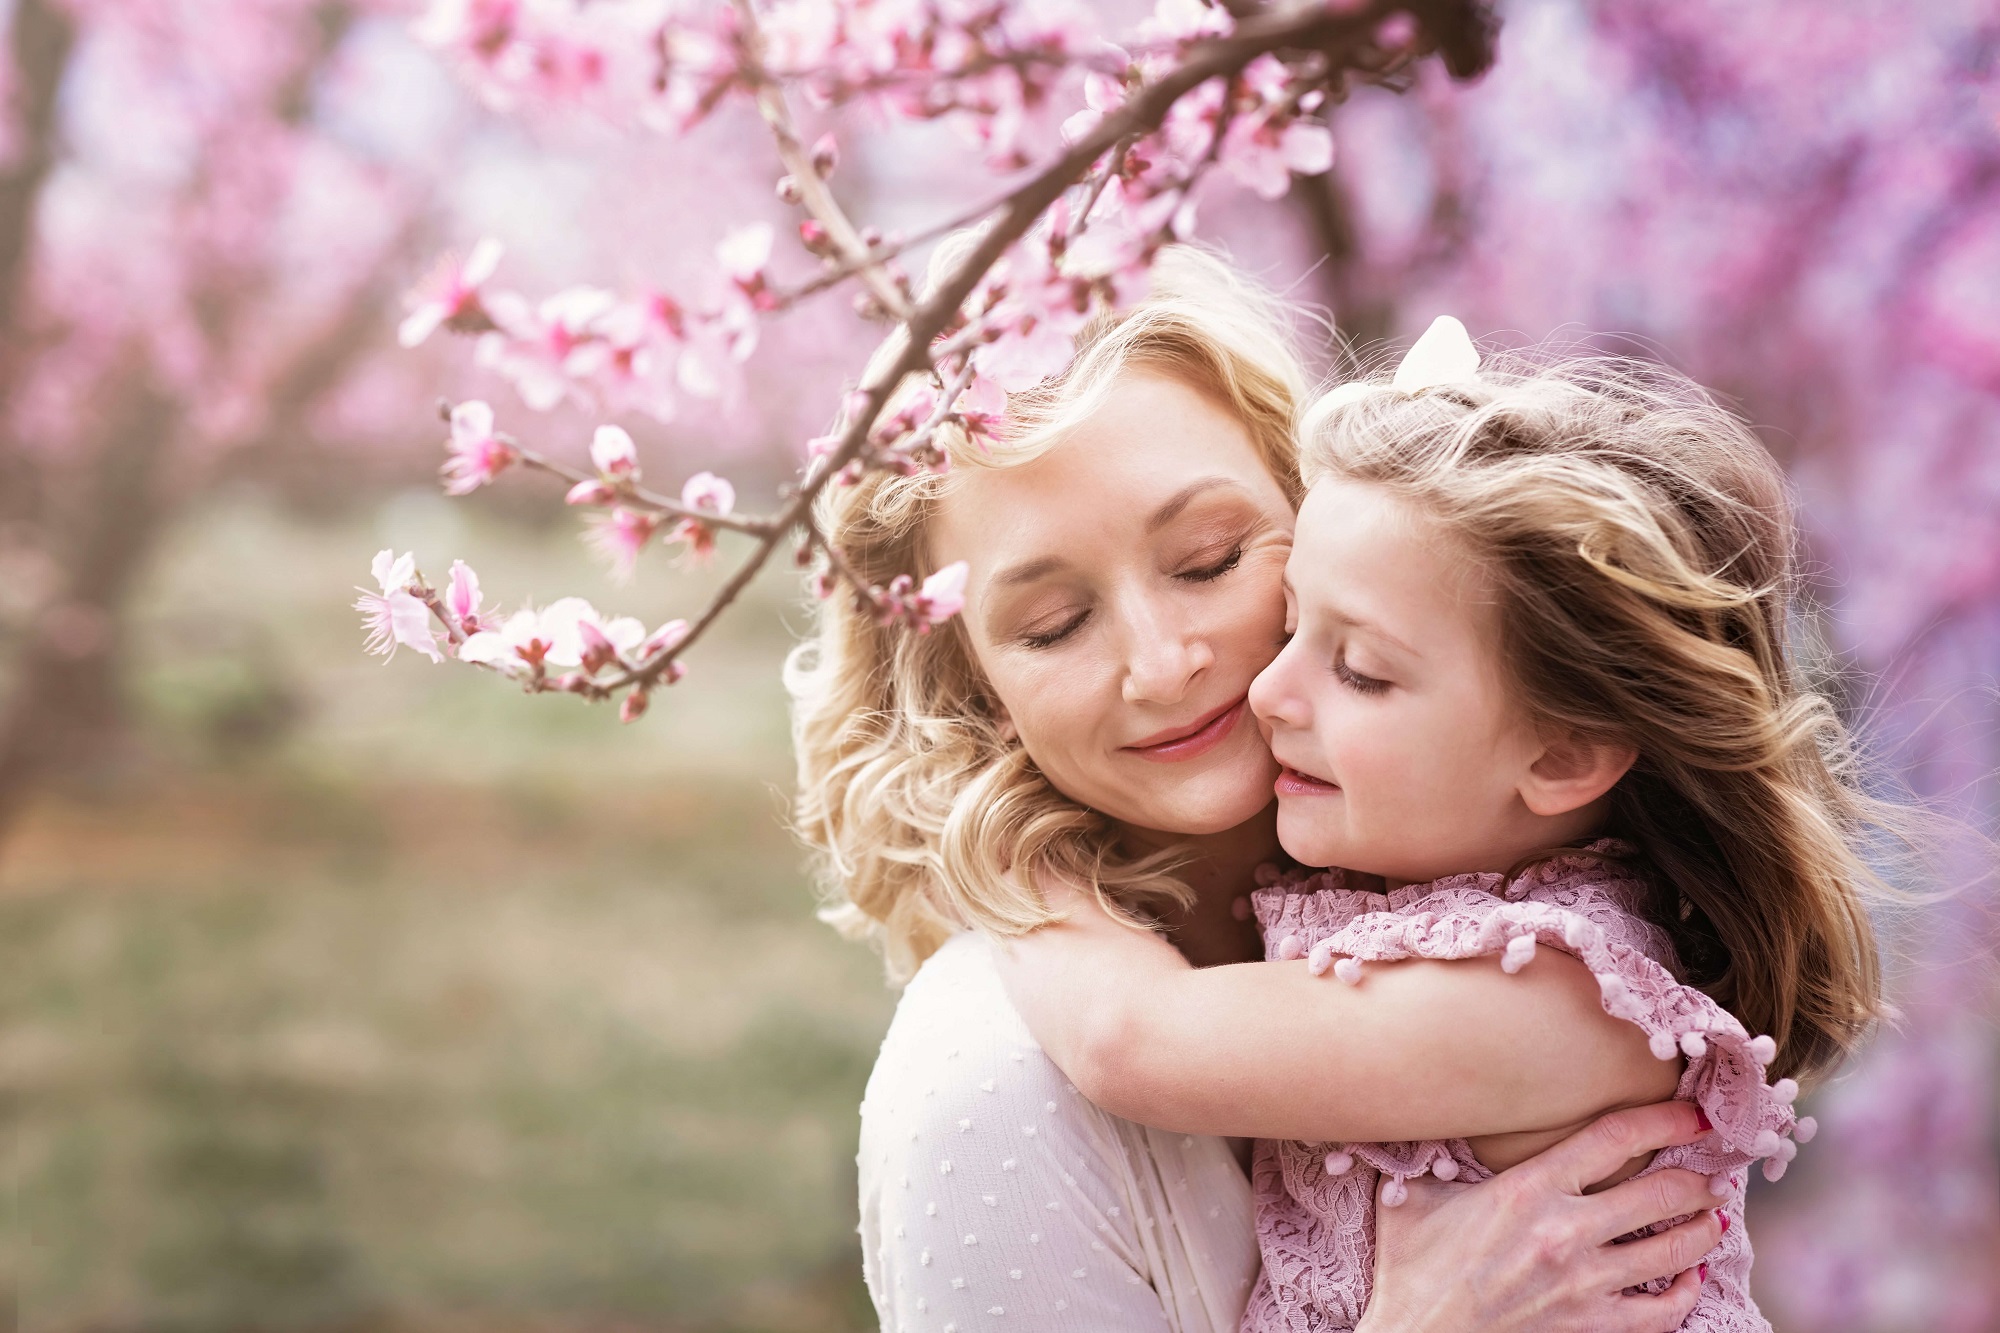 List of the best Facebook mothers day wishes for you